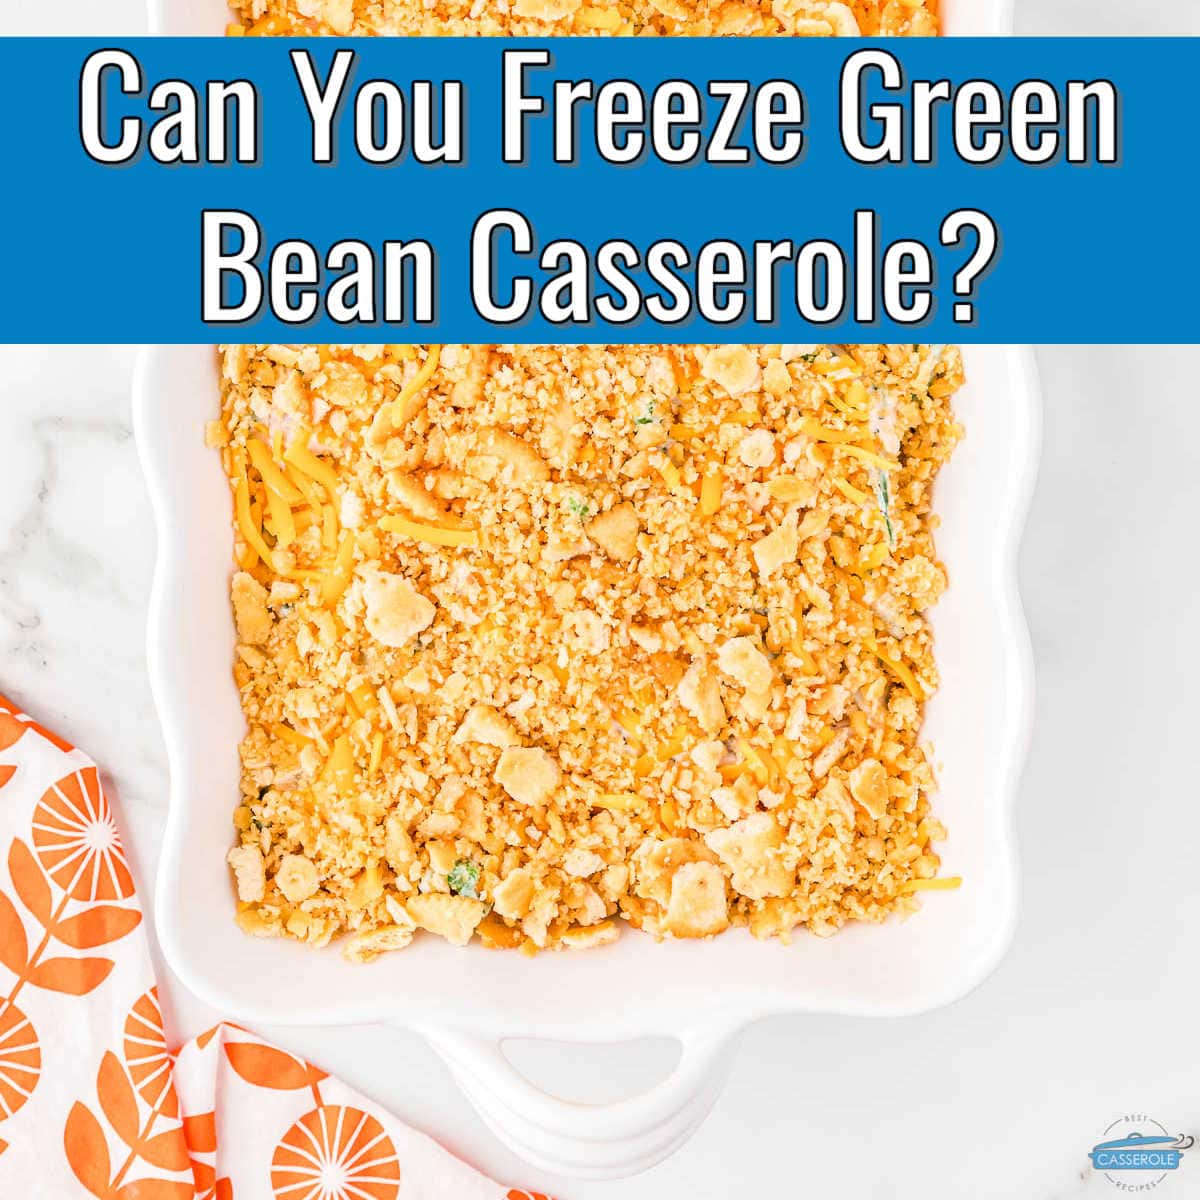 unbaked casserole with blue banner and text "Can you freeze green bean casserole?"